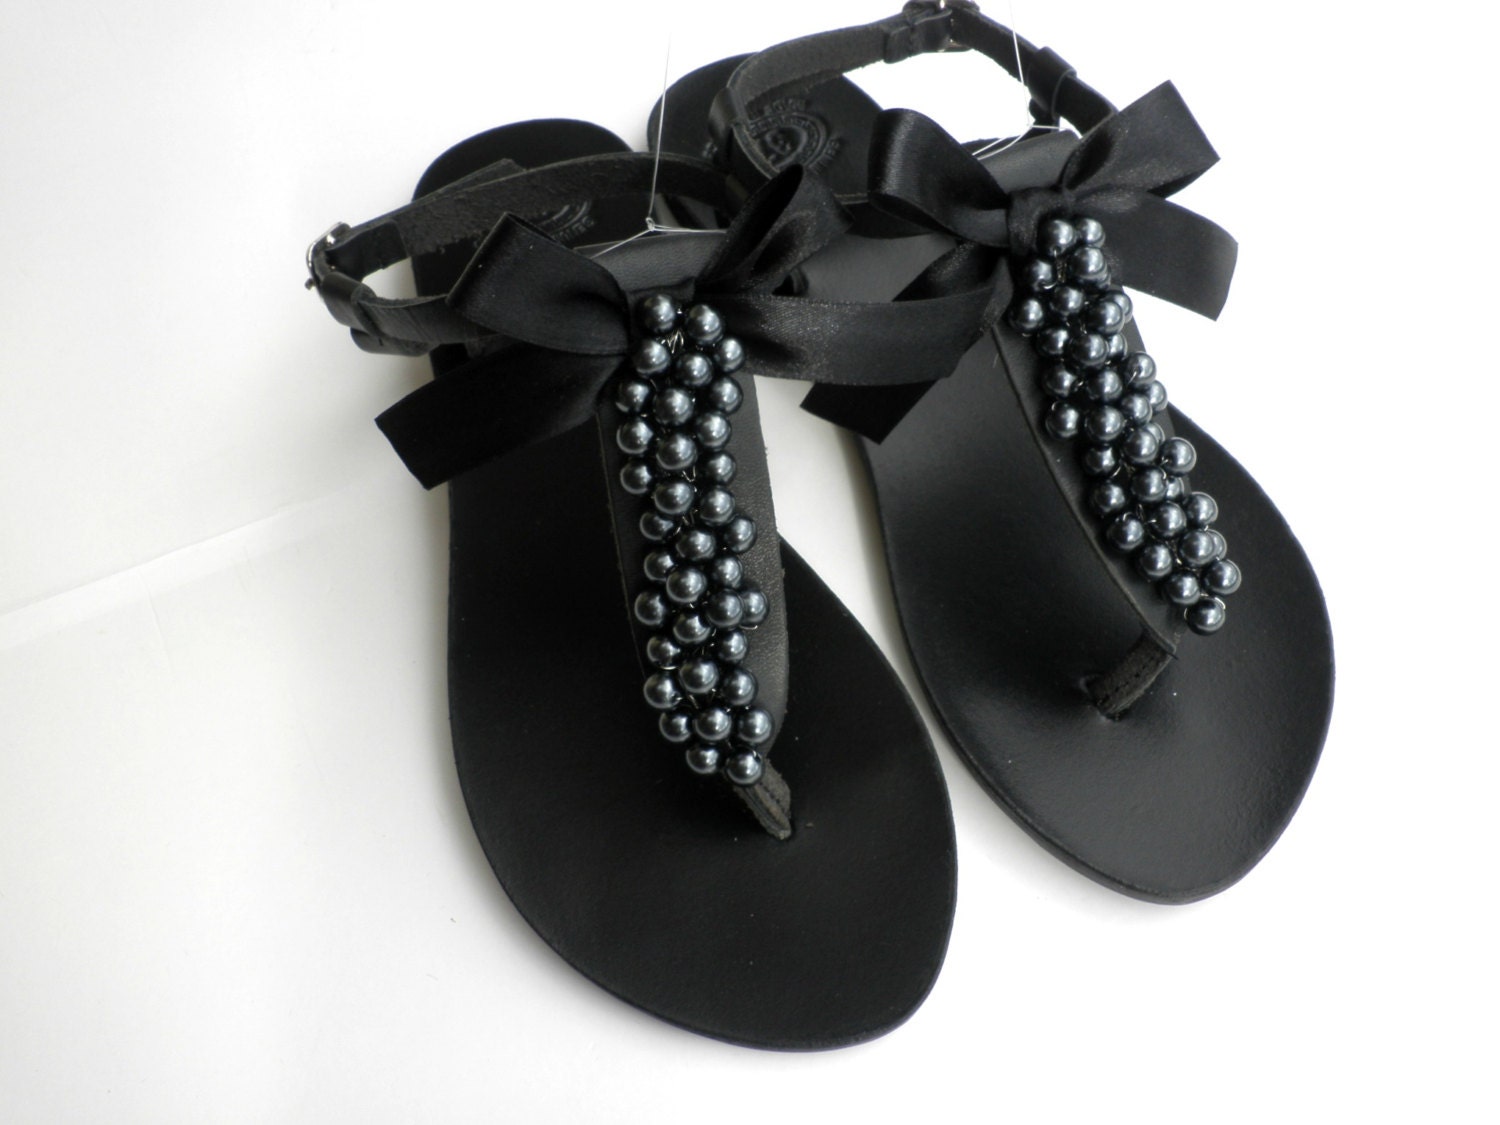 Black sandals, Decorated sandals with black pearls black bow, Pearls ...